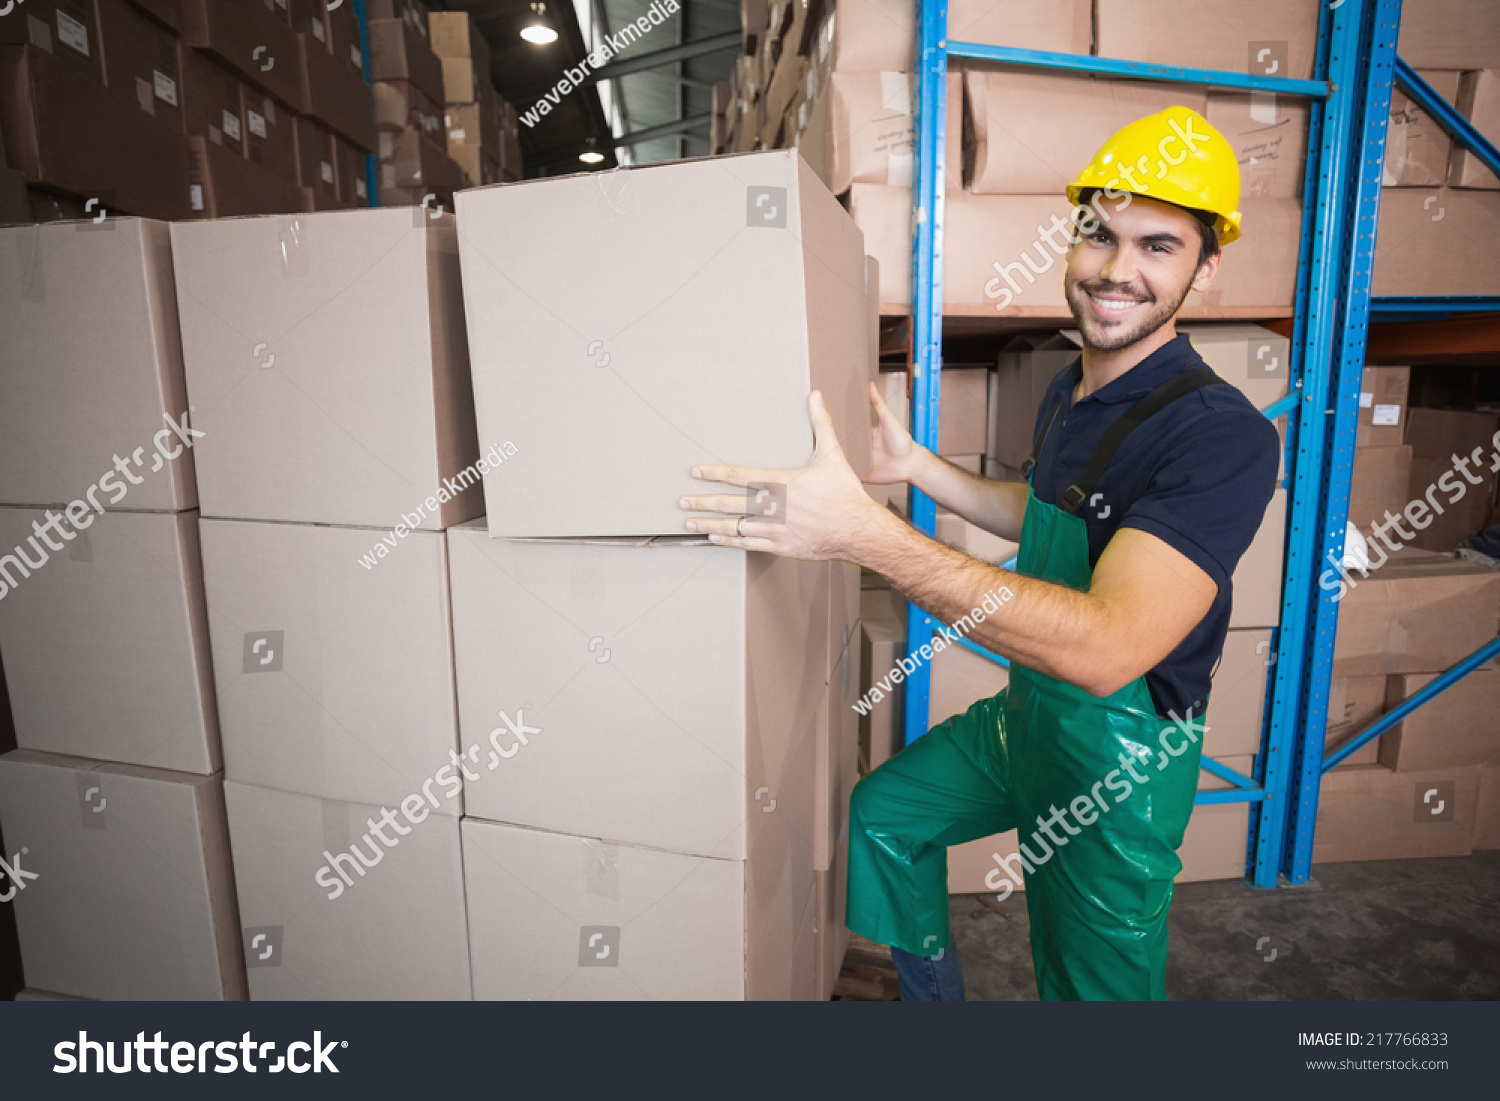 Warehouse worker loading up a pallet in a large warehouse #217766833